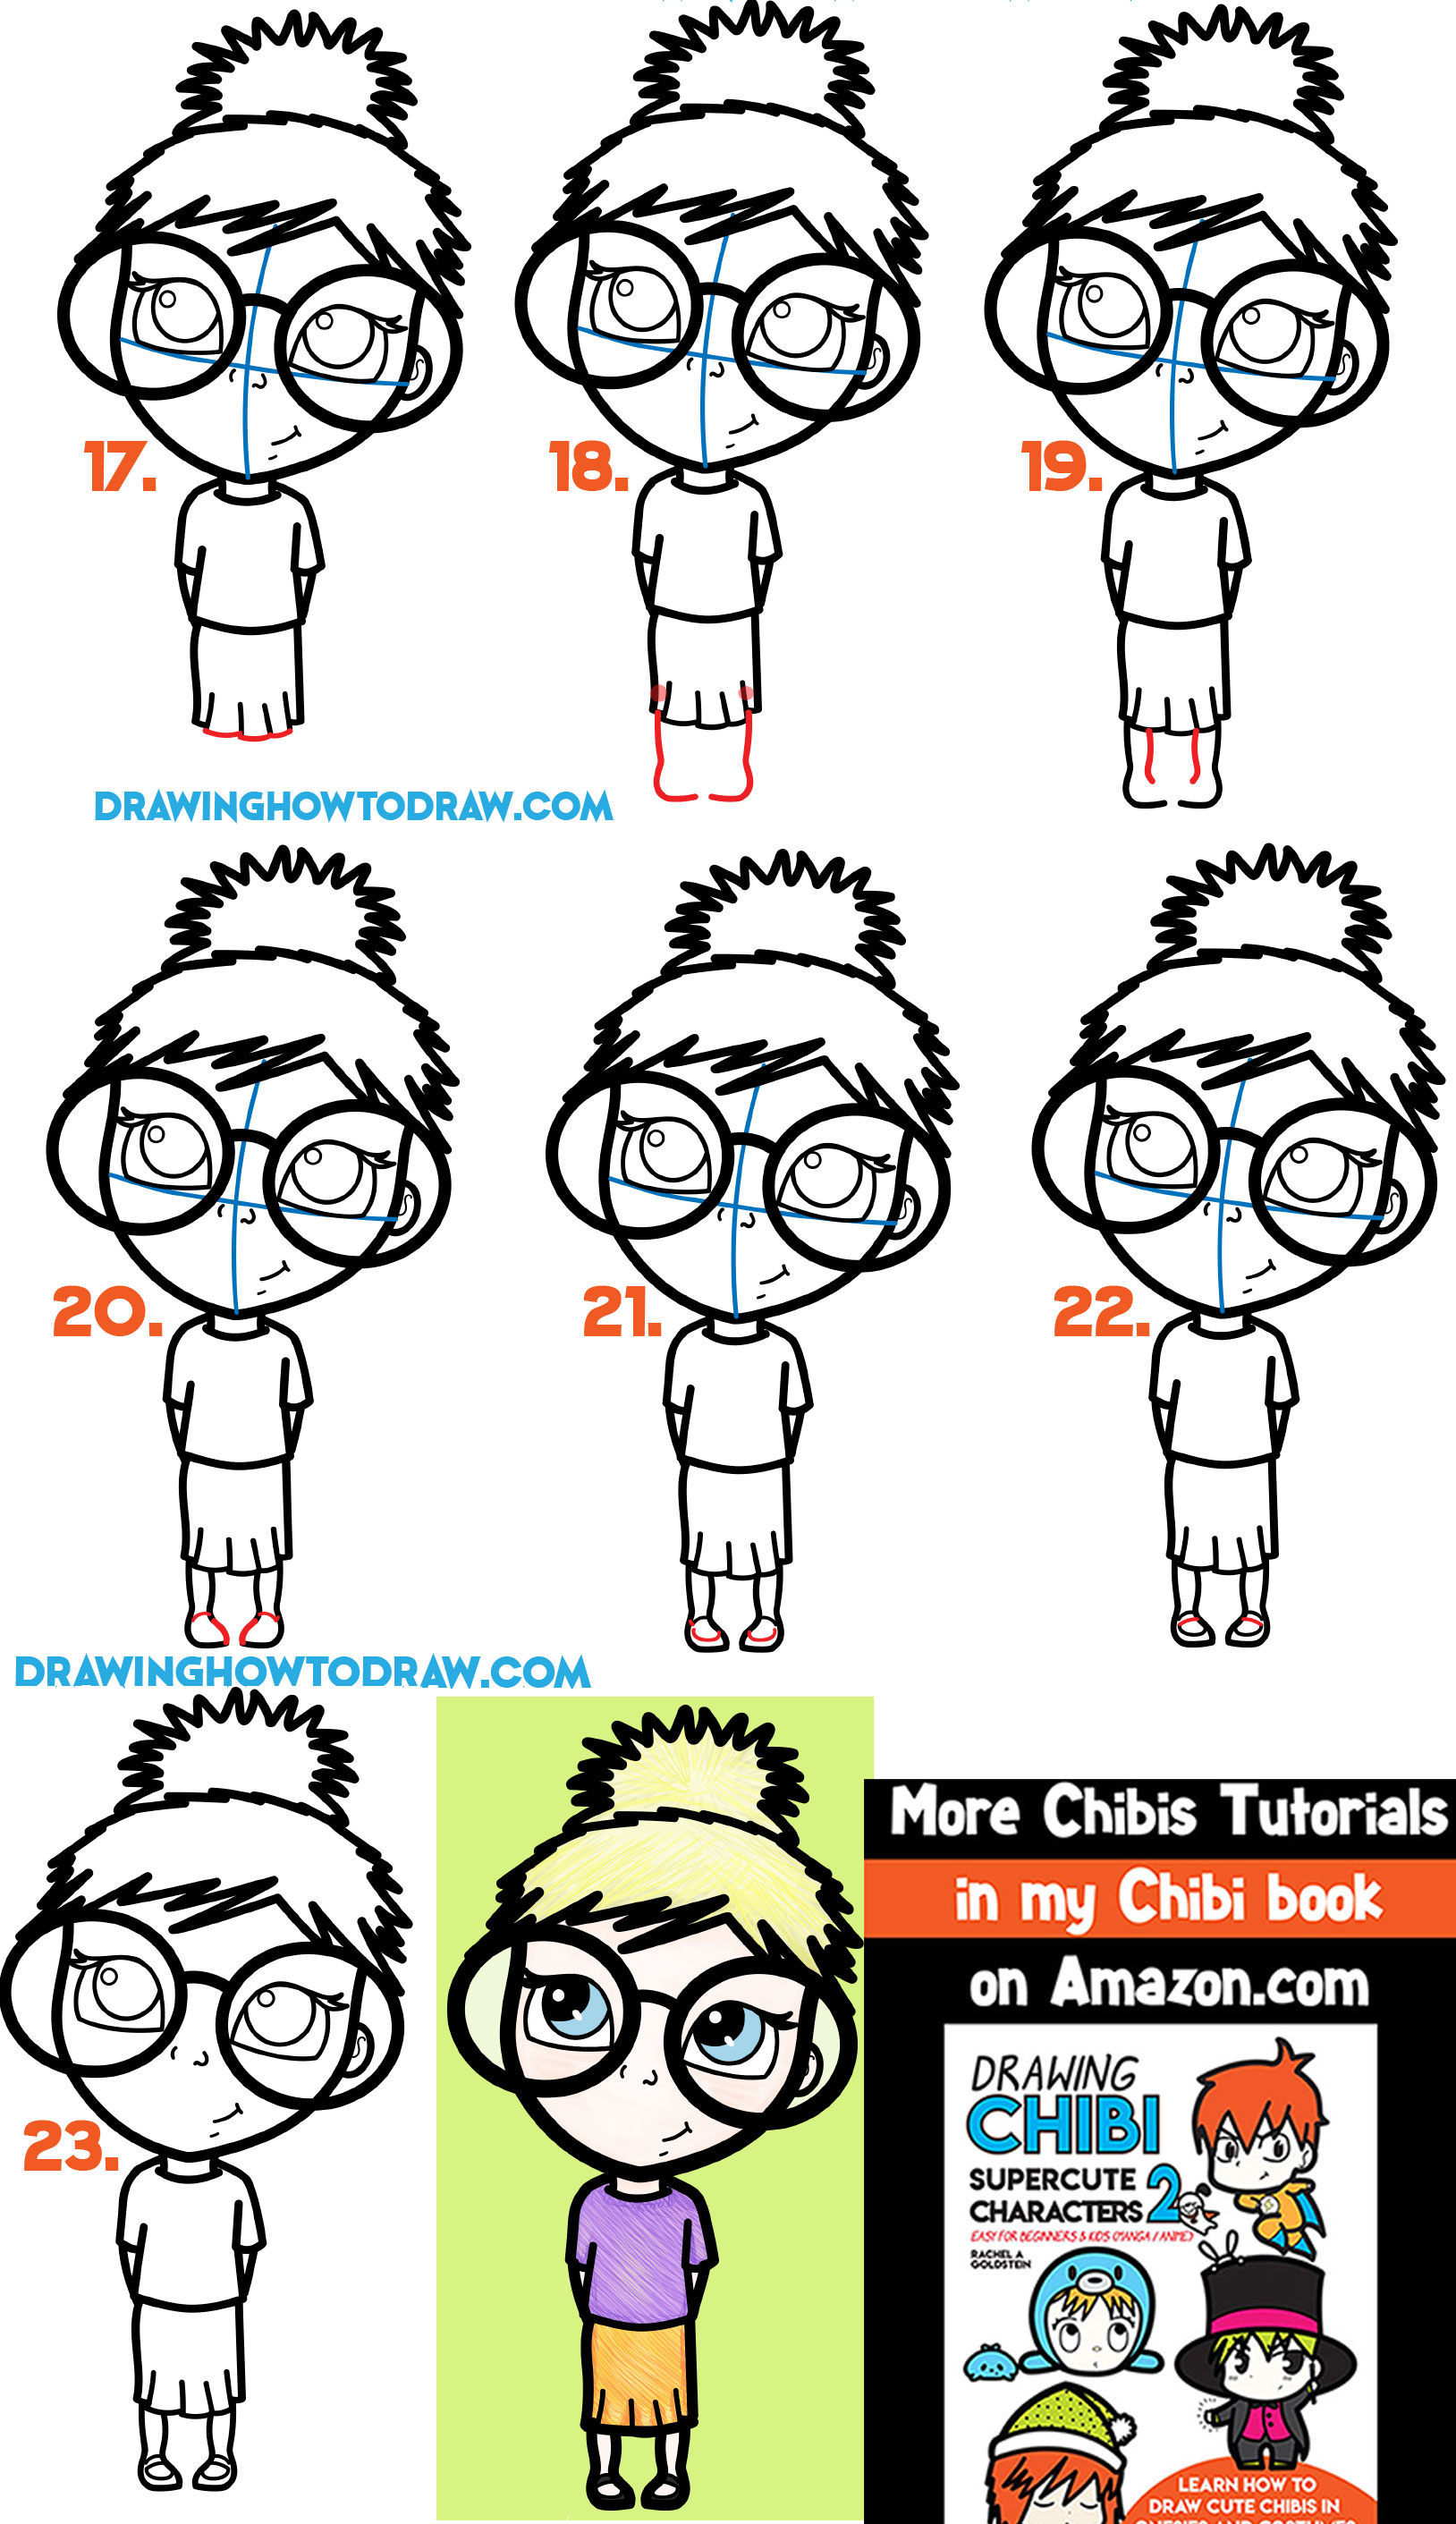 How to Draw a Cute Girl with Glasses Illustration - Easy Steps Drawing  Tutorial for Beginners - How to Draw Step by Step Drawing Tutorials